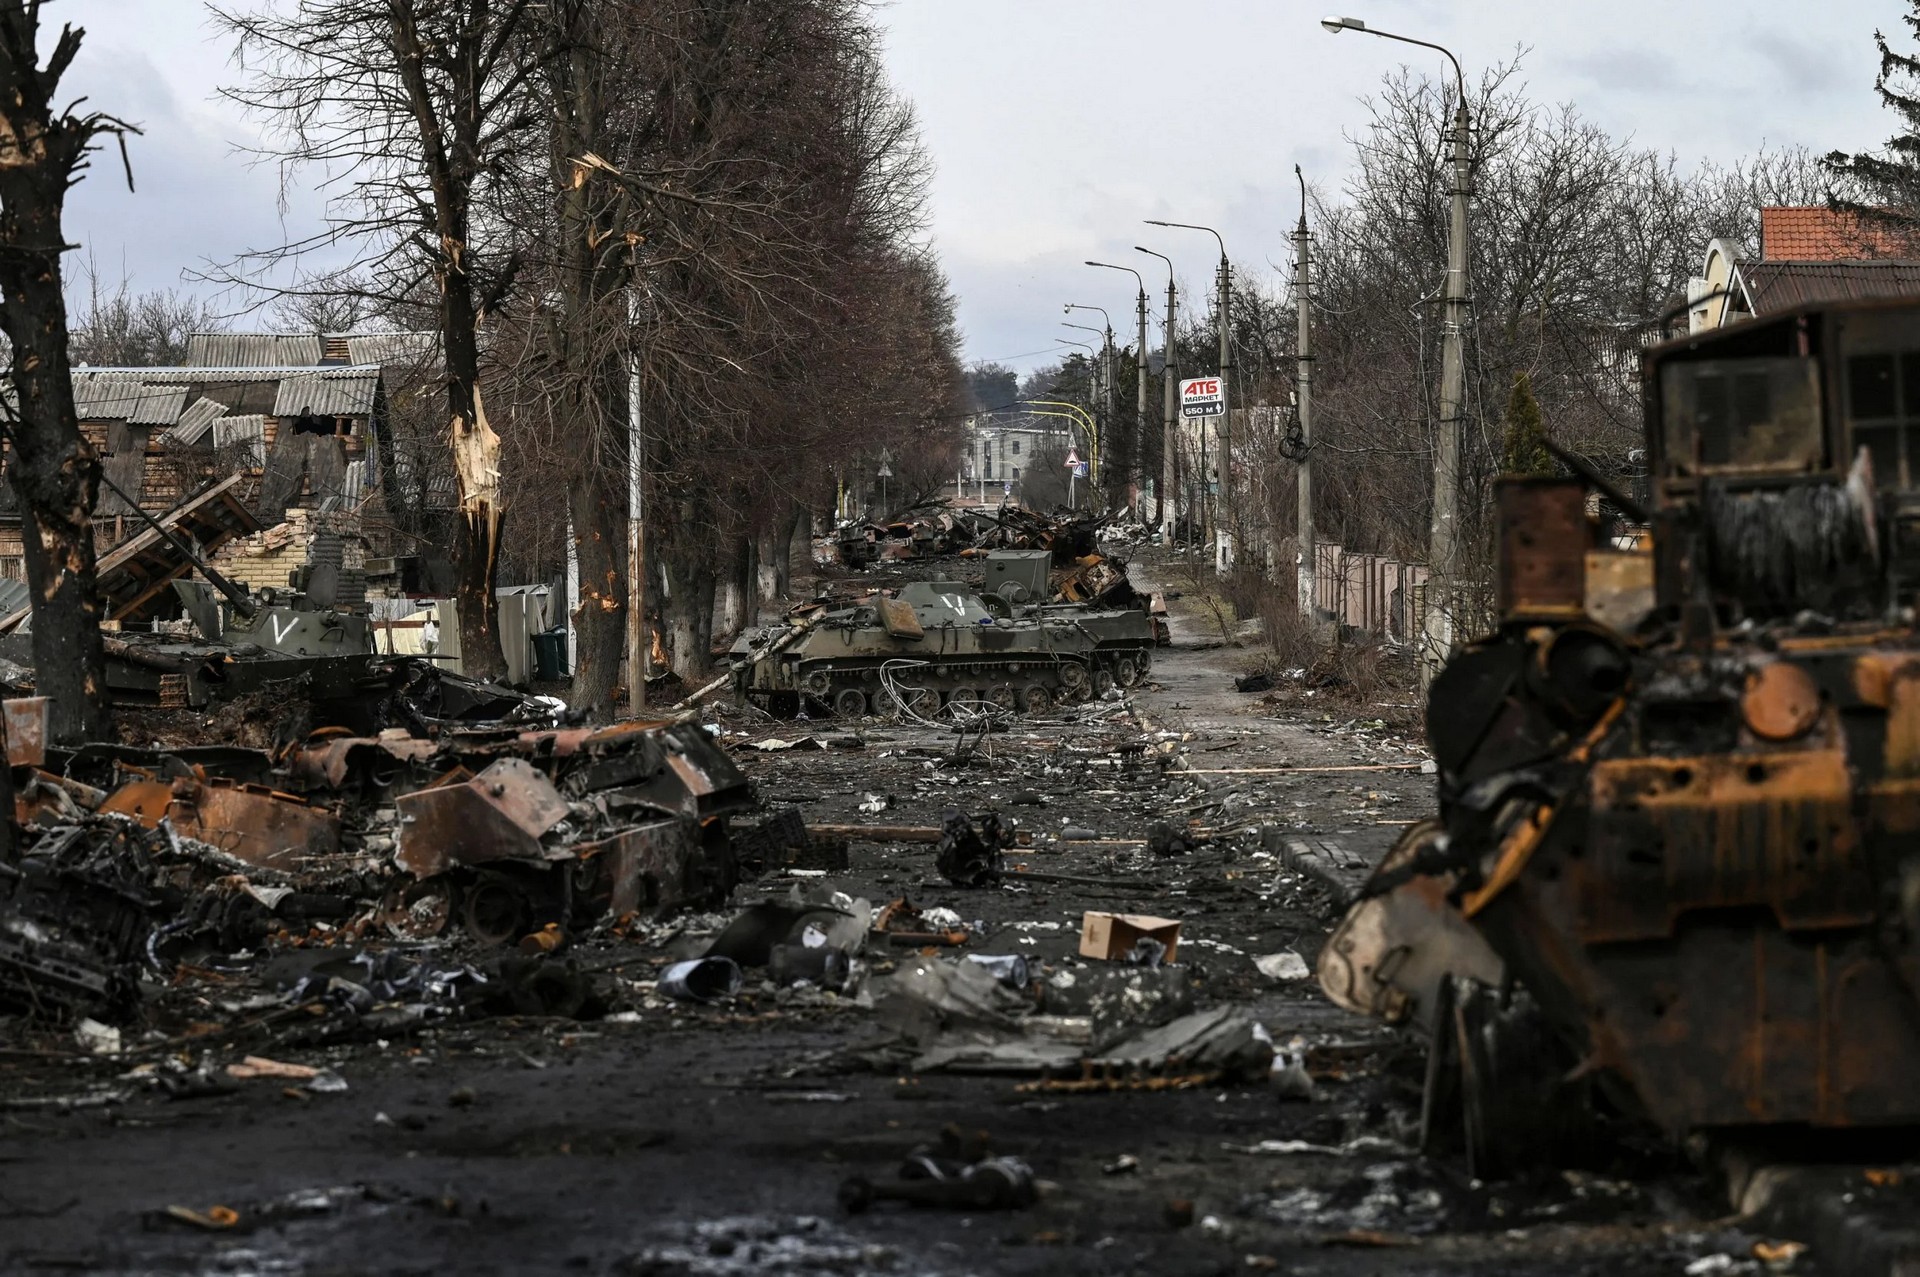 Destroyed Russian armored vehicles in the city of Bucha